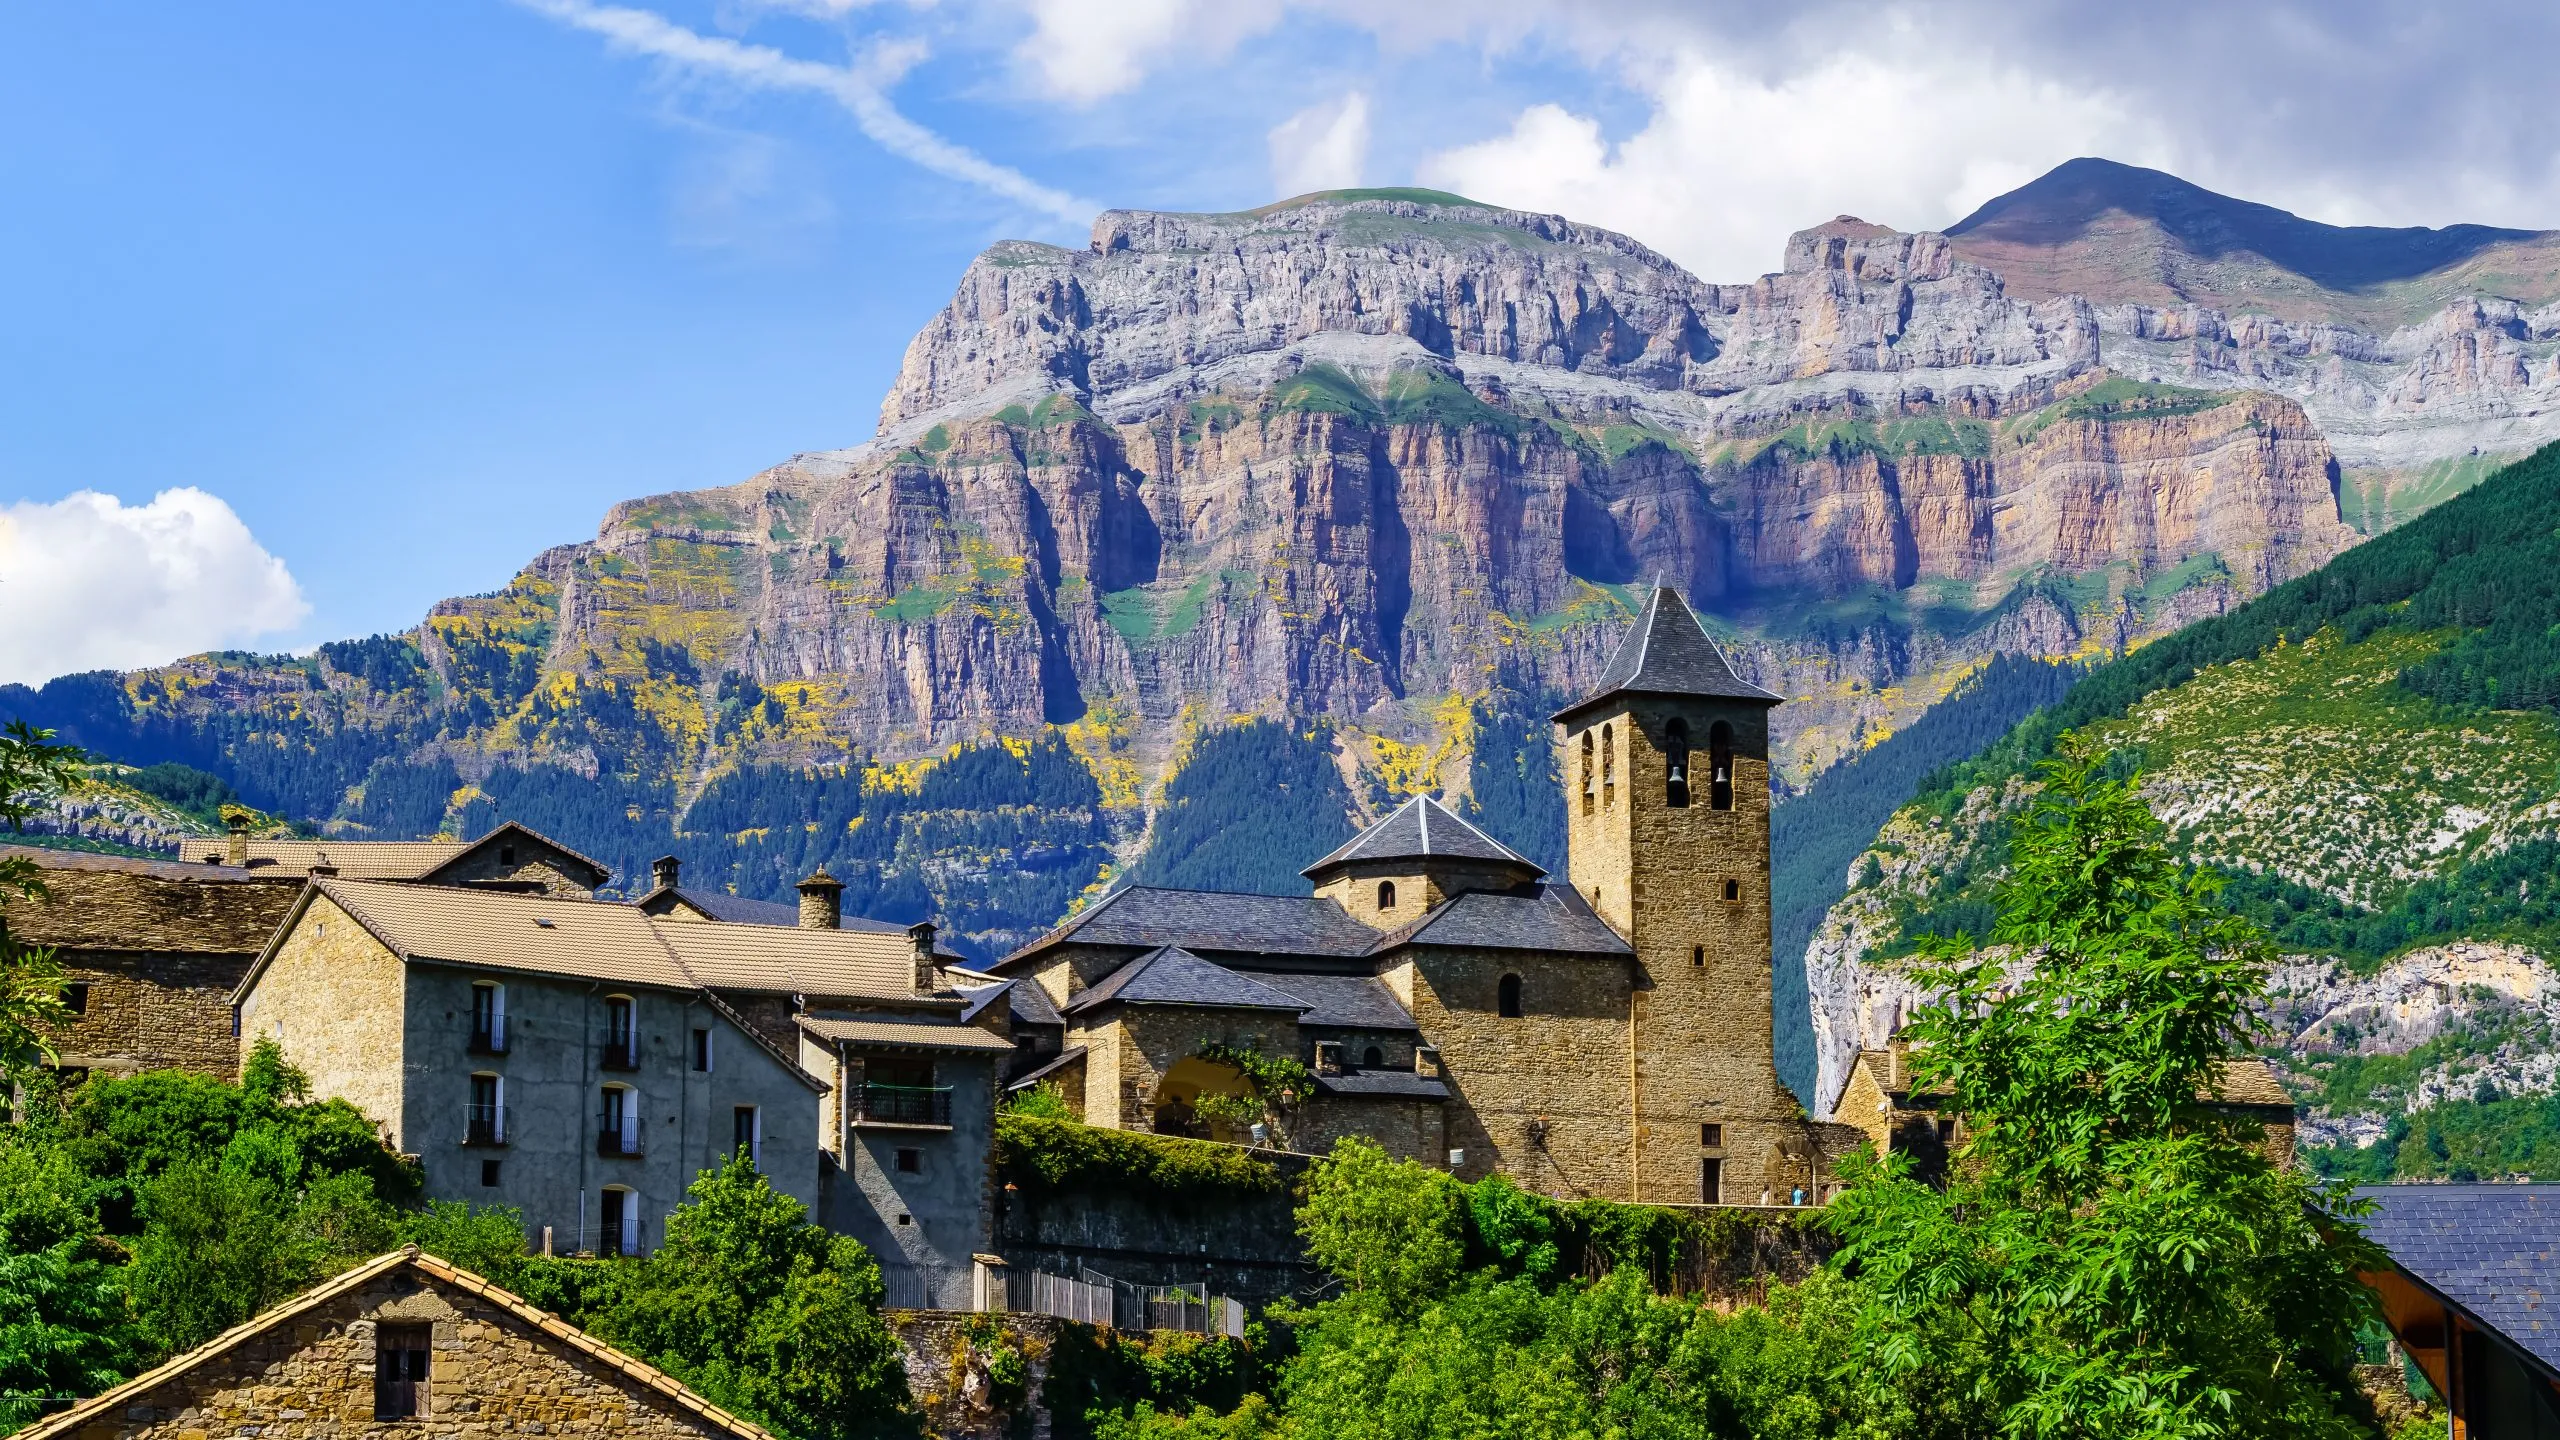 Mountain village in the Ordesa Valley of the Spanish Pyrenees, called Torla.